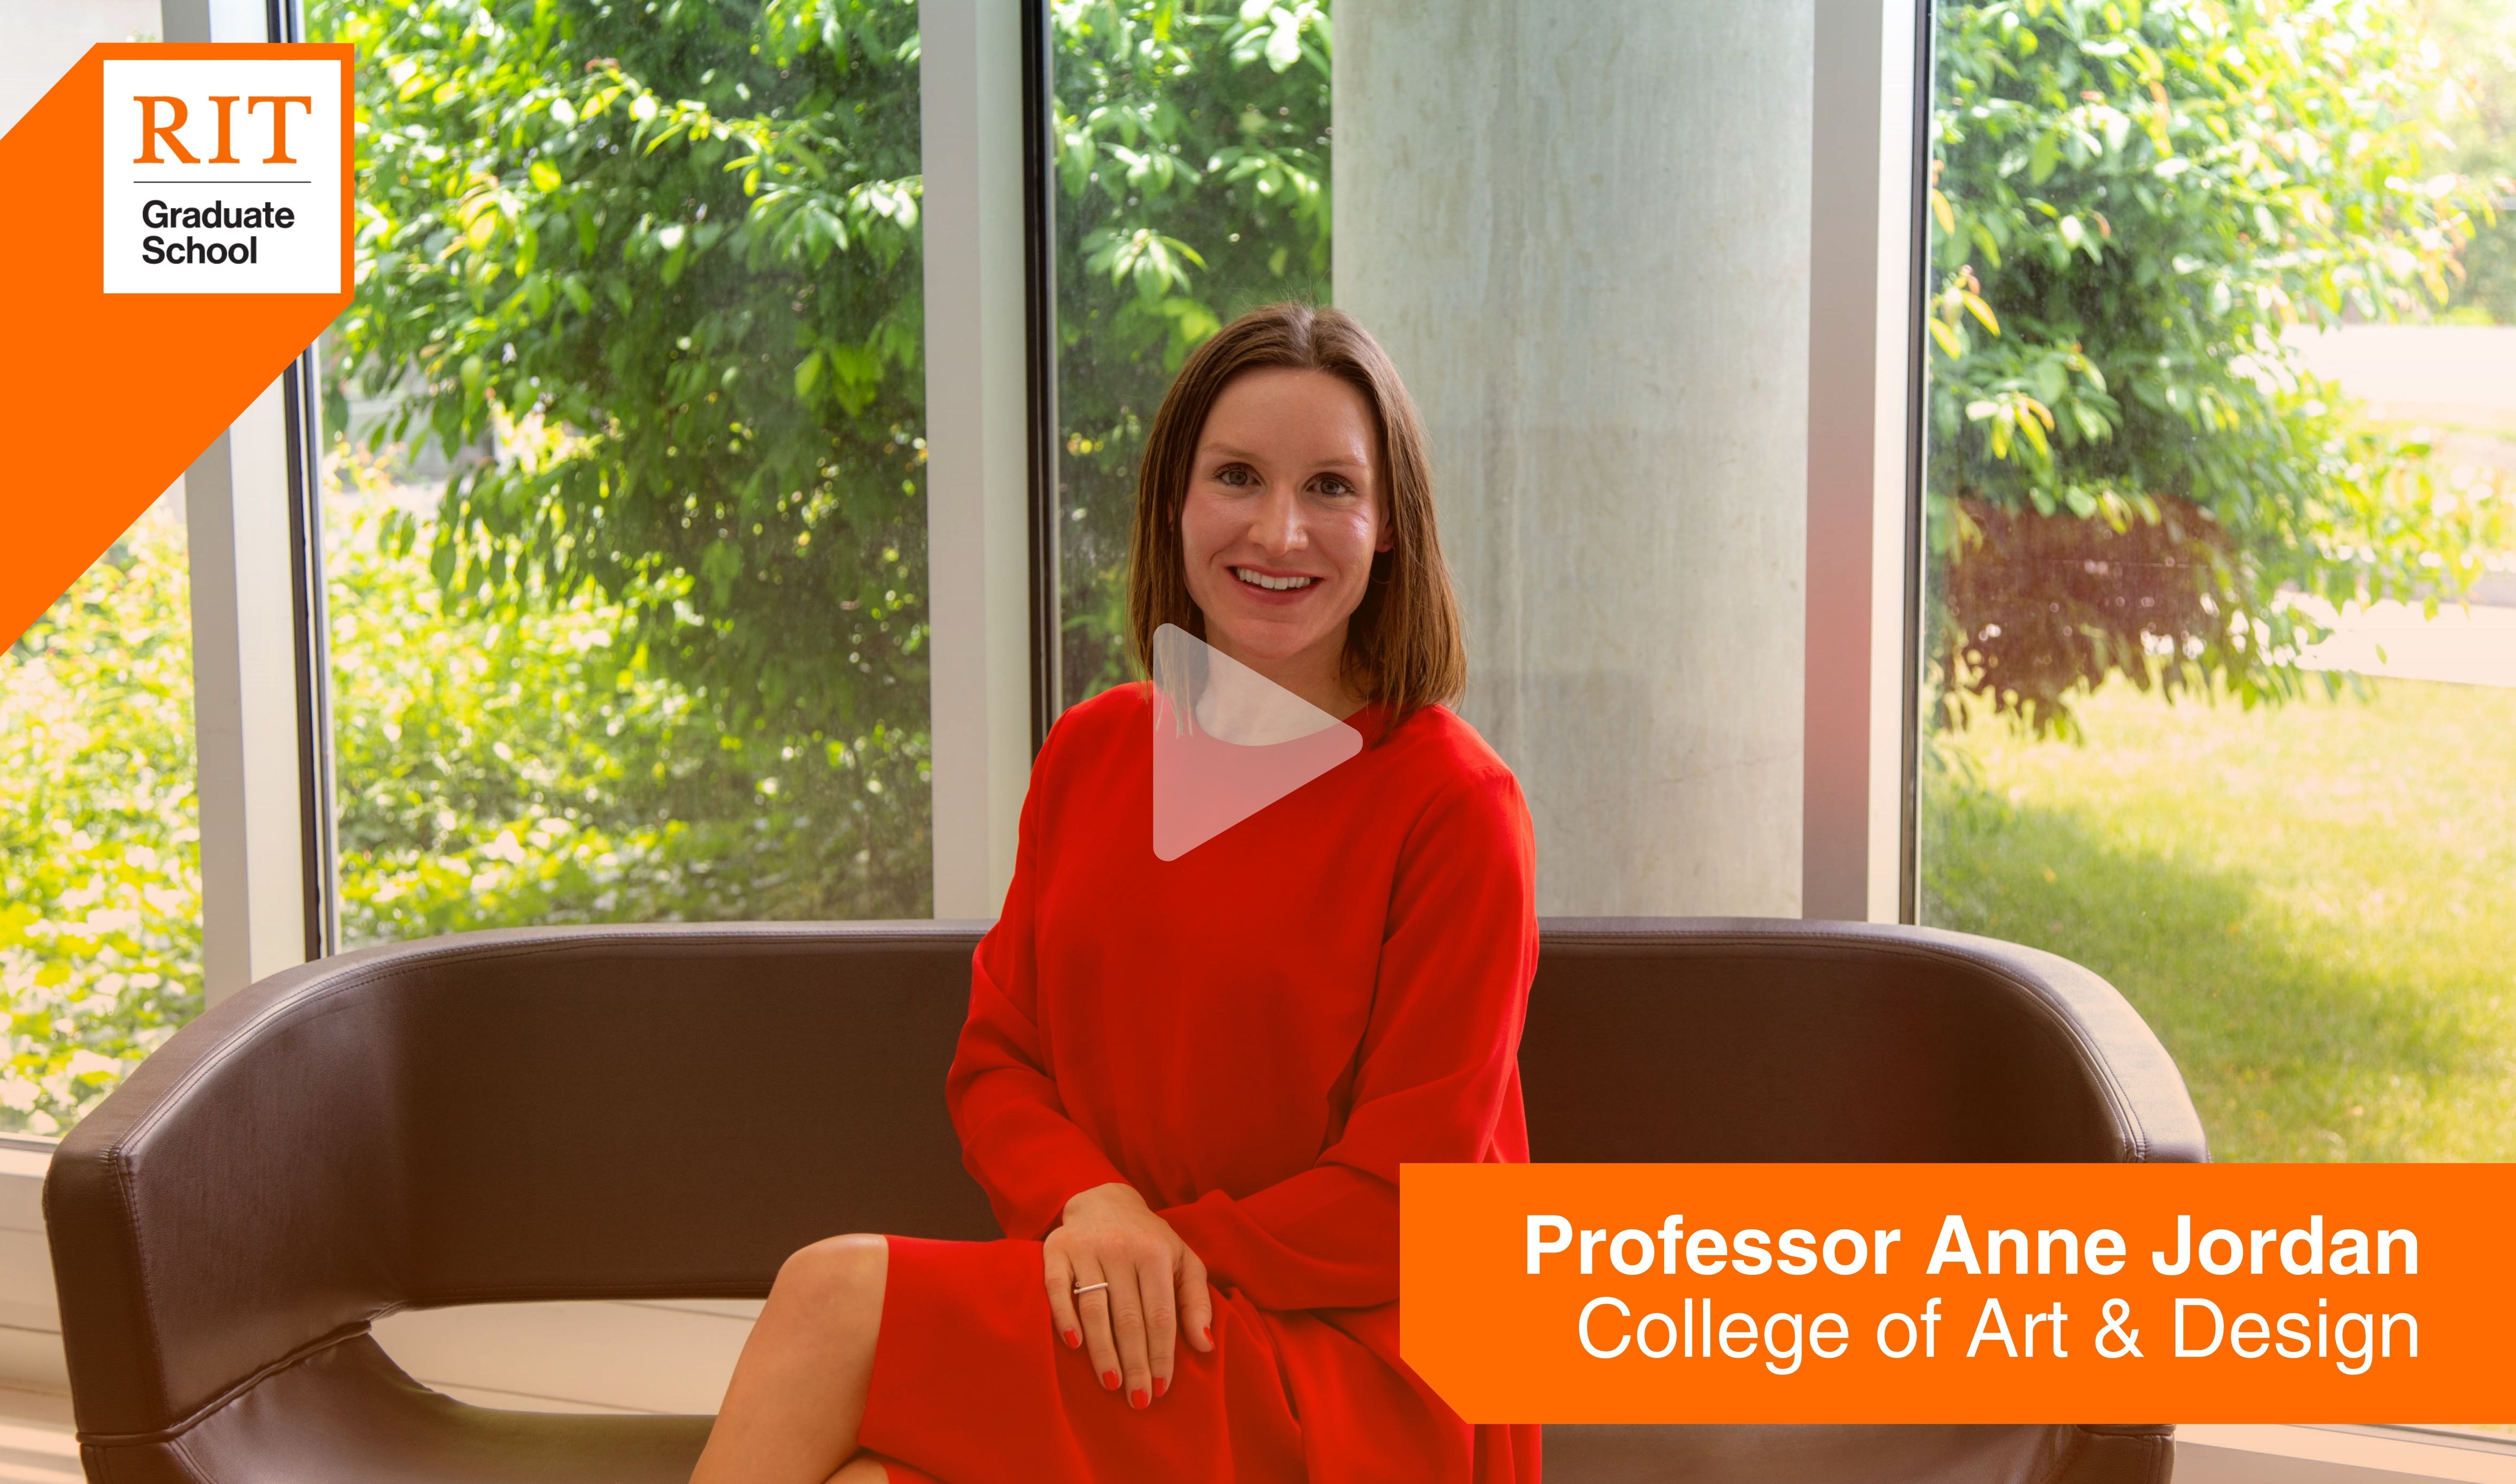 Professor Anne jordan sits on a couch for an interview with the Graduate School. click image to watch video